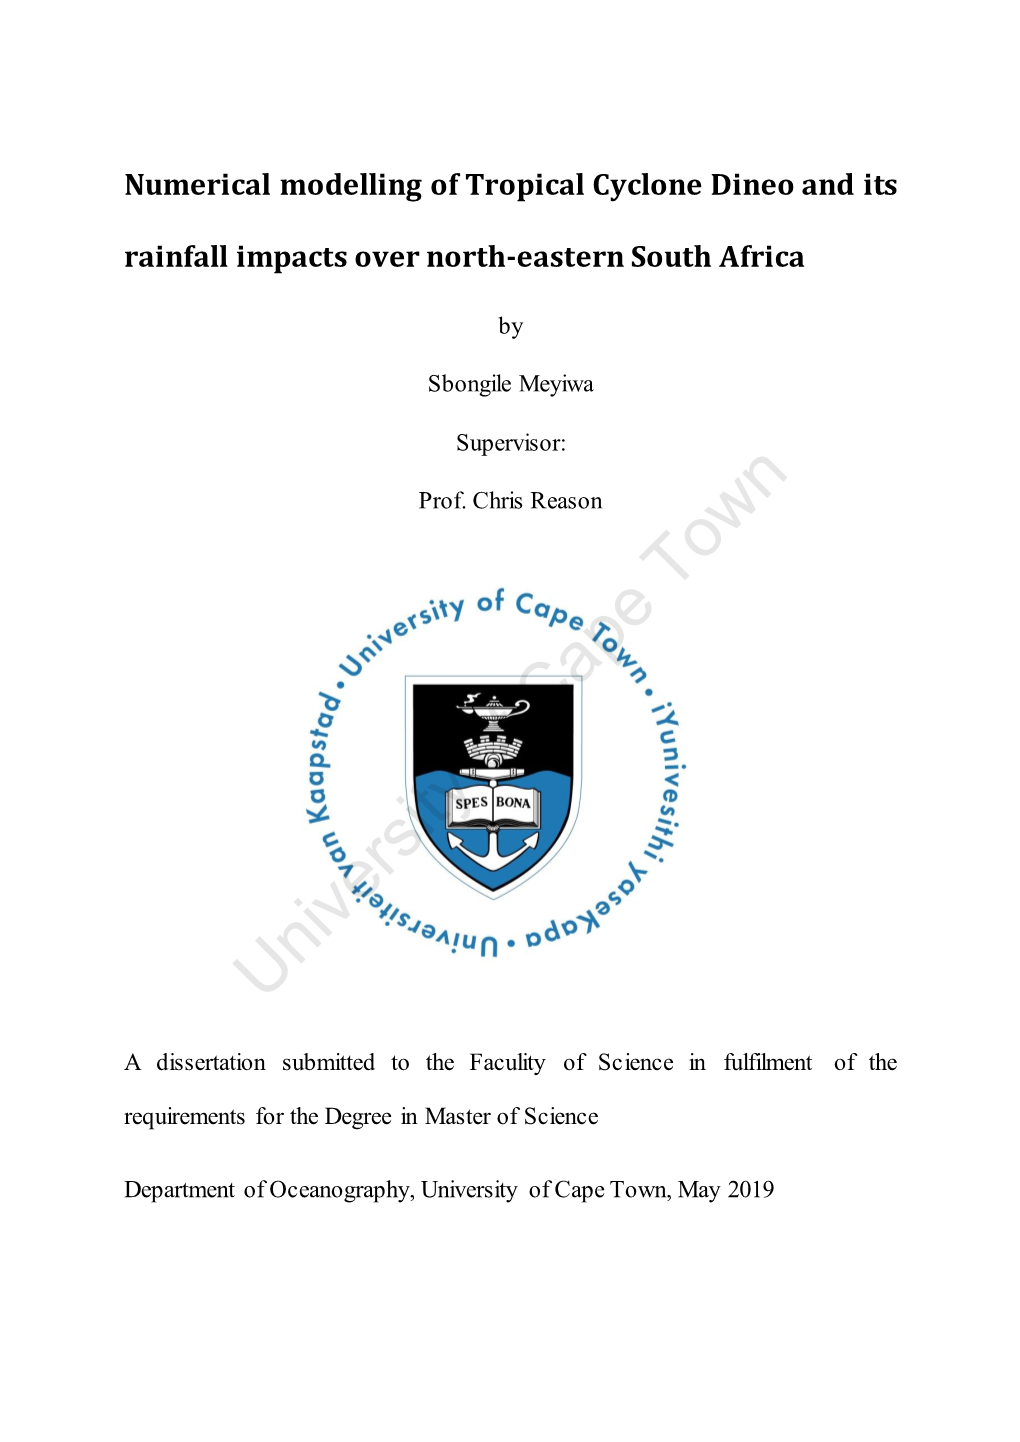 Numerical Modelling of Tropical Cyclone Dineo and Its Rainfall Impacts Over North-Eastern South Africa